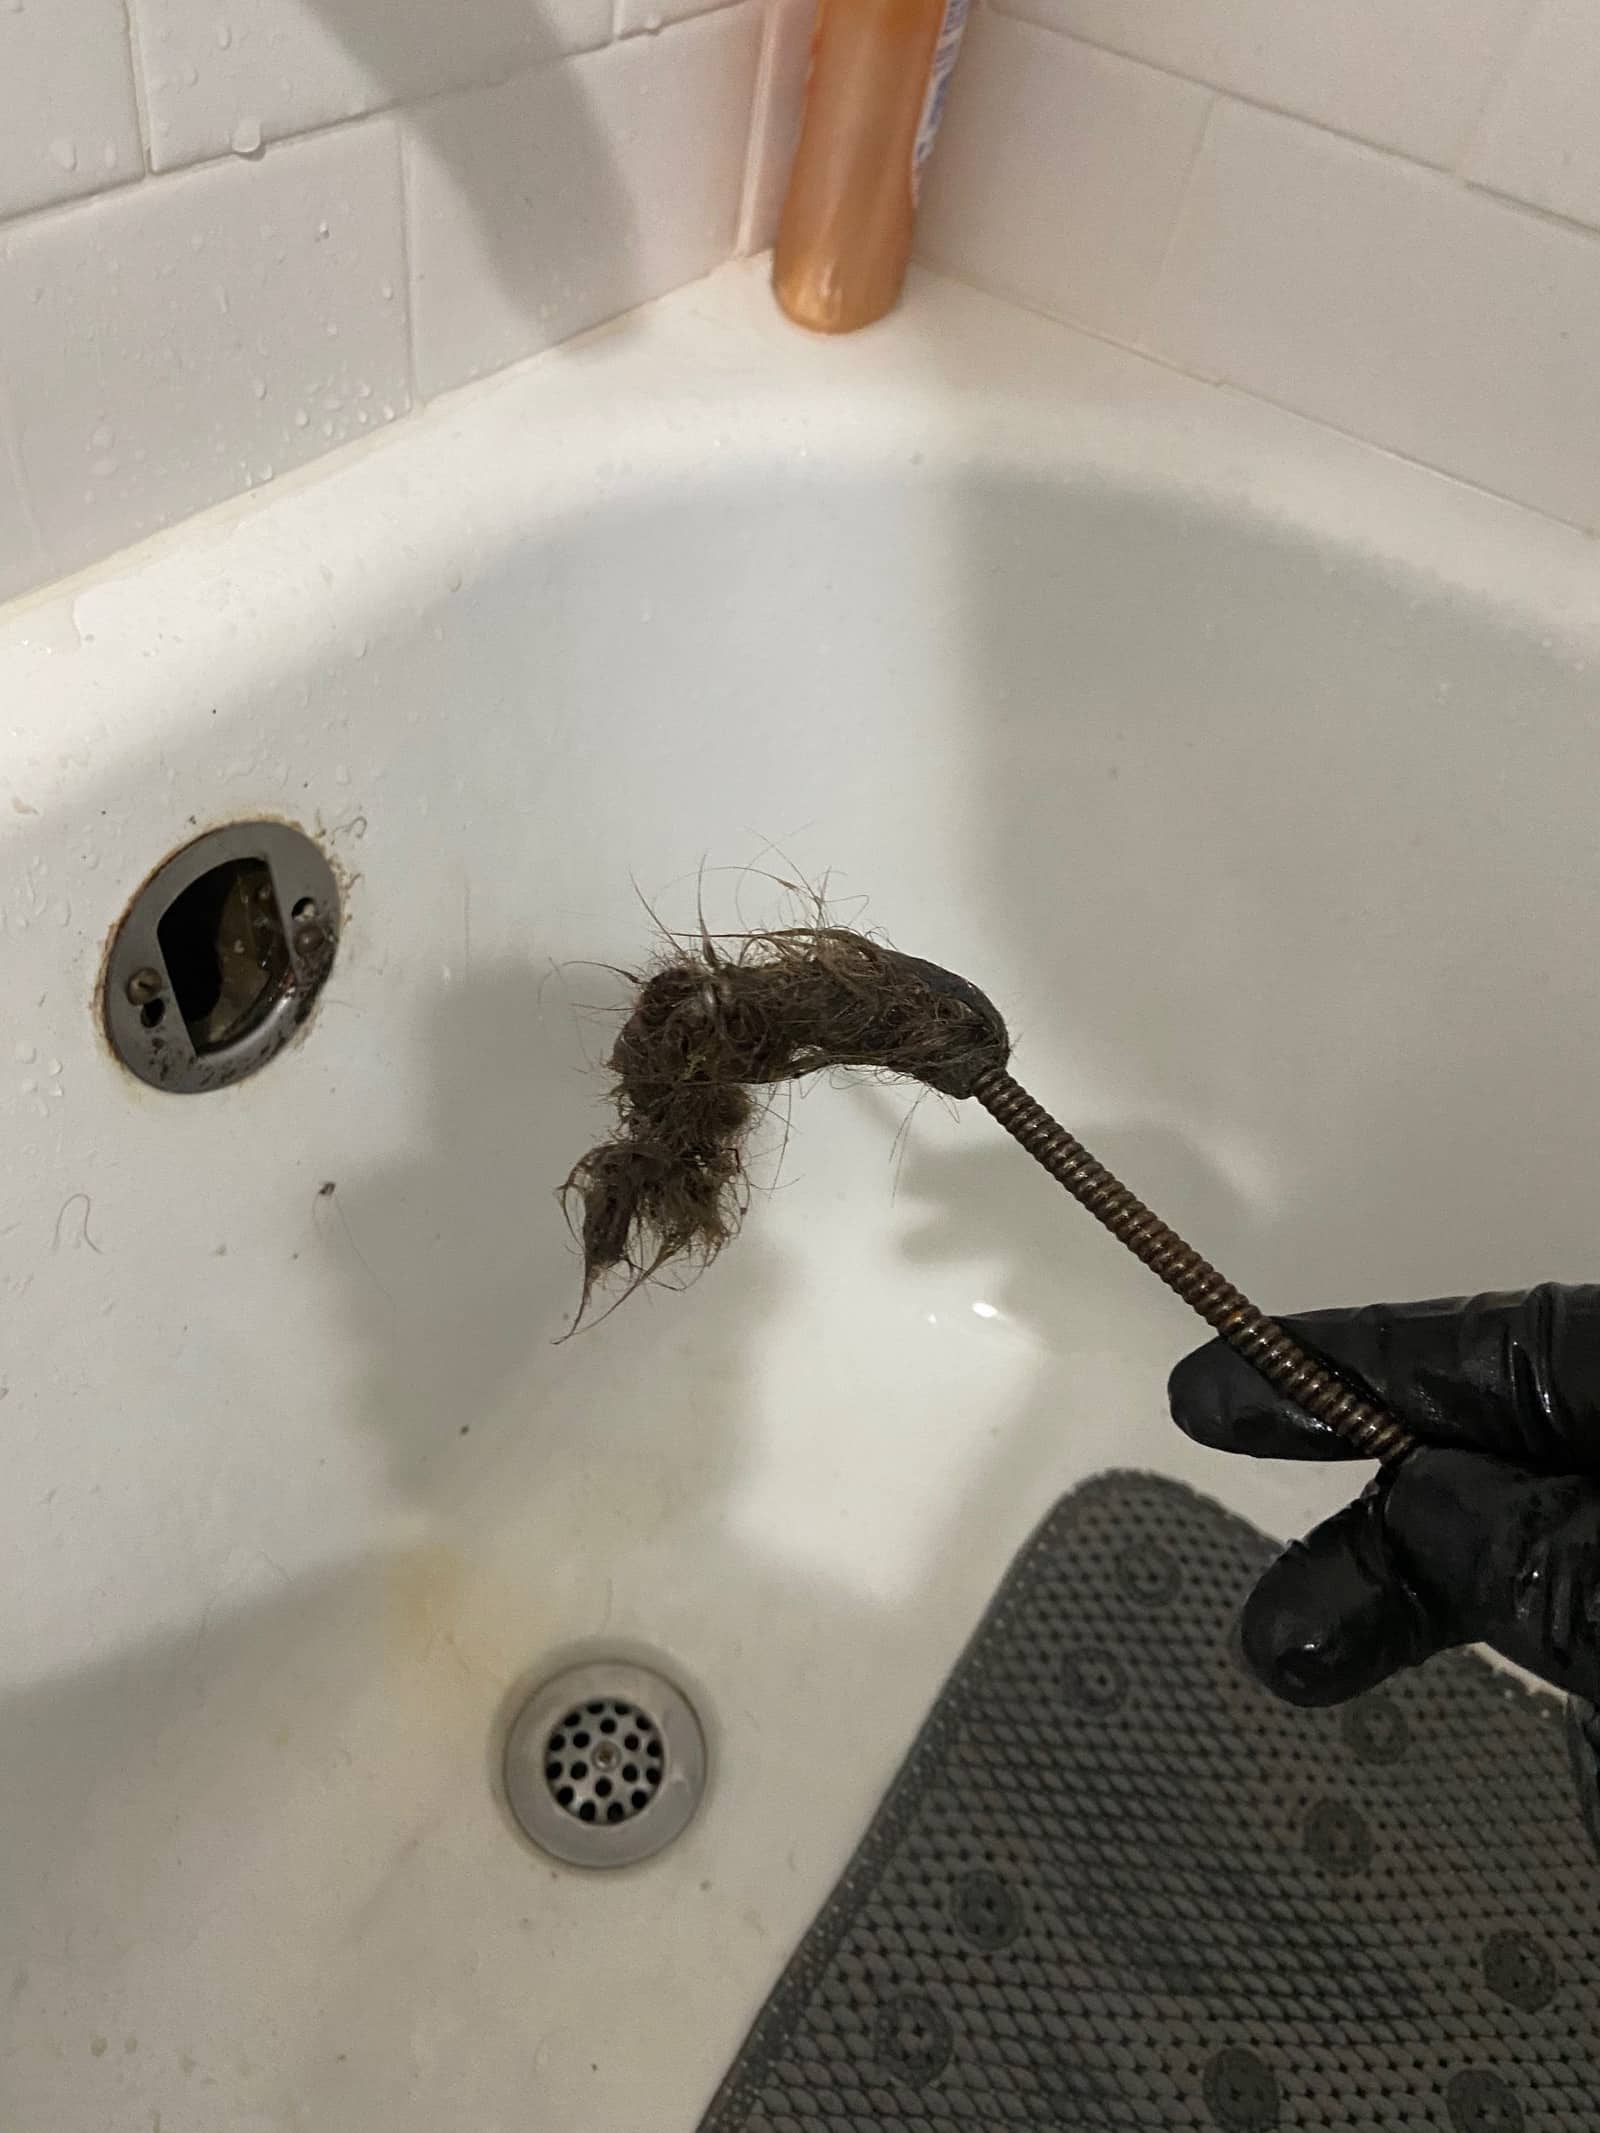 How To Get Hair Out Of Sink Drain - All Coast Inspections